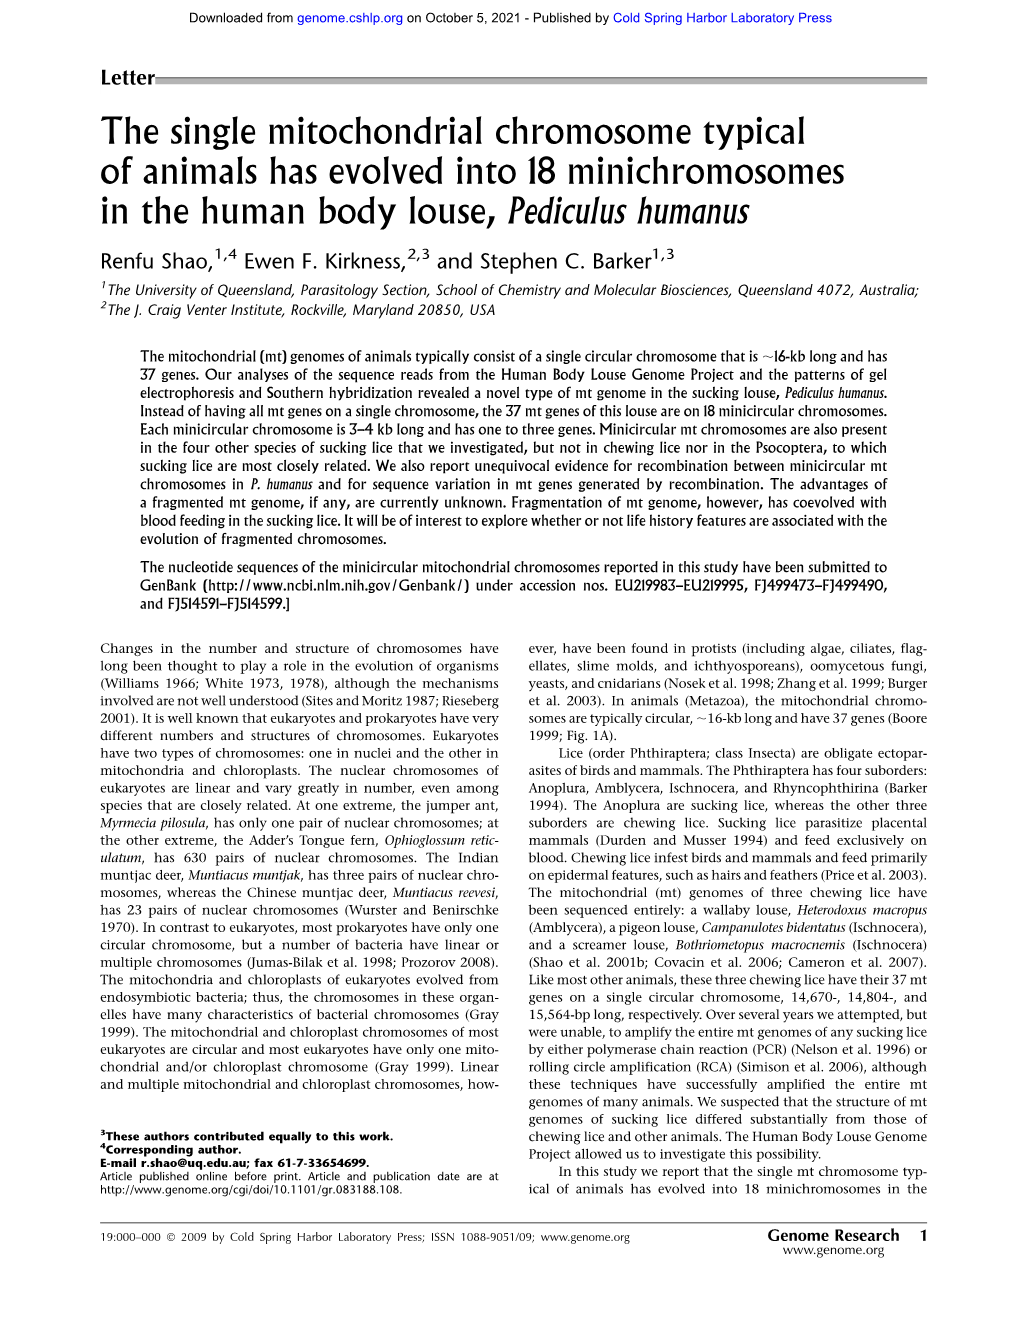 The Single Mitochondrial Chromosome Typical of Animals Has Evolved Into 18 Minichromosomes in the Human Body Louse, Pediculus Humanus